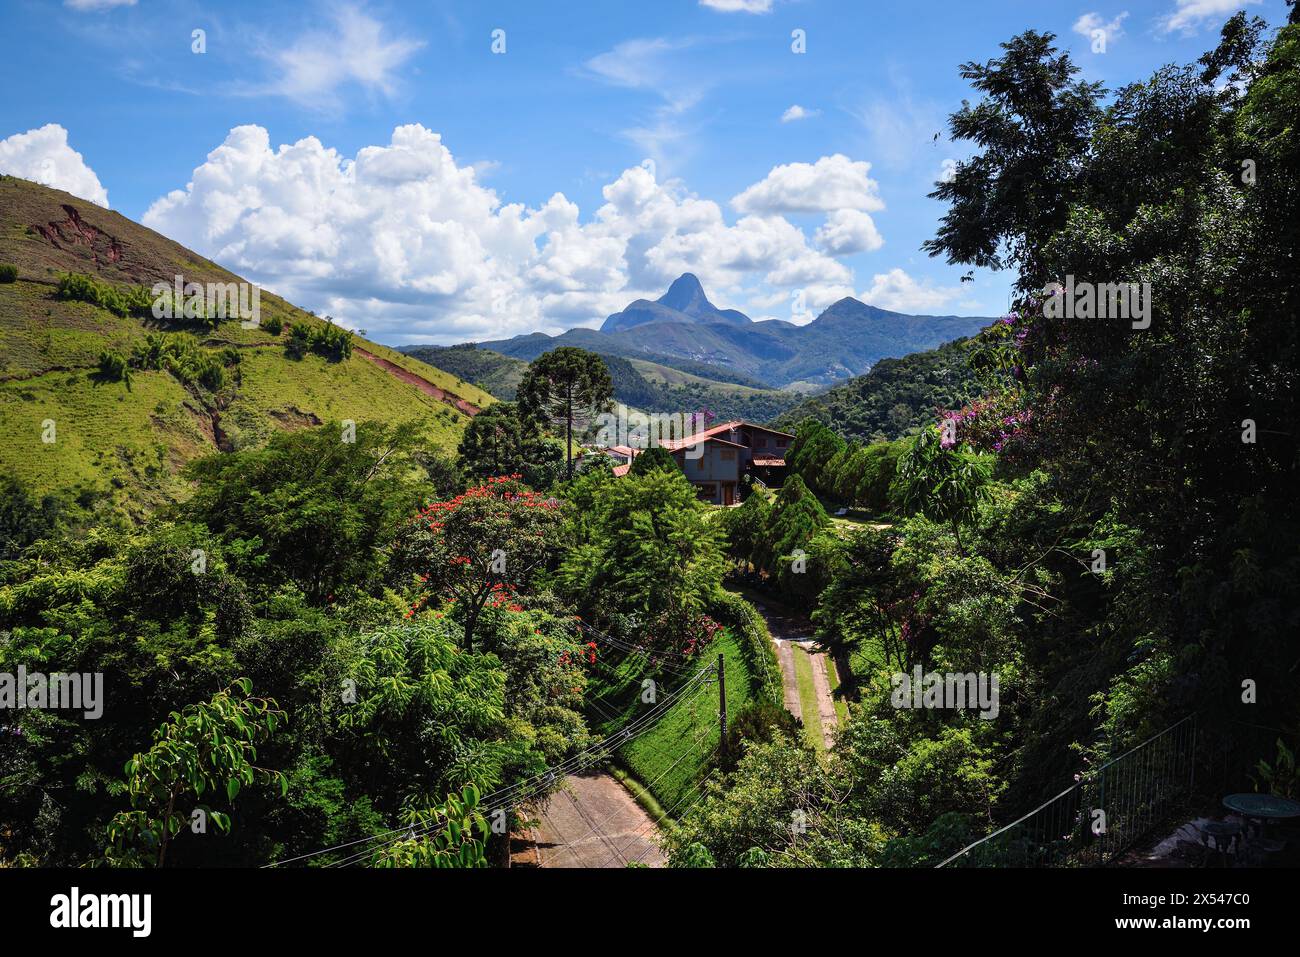 An Idyllic View of Mountains, Trees and Roads in the Countryside of Brazil Stock Photo